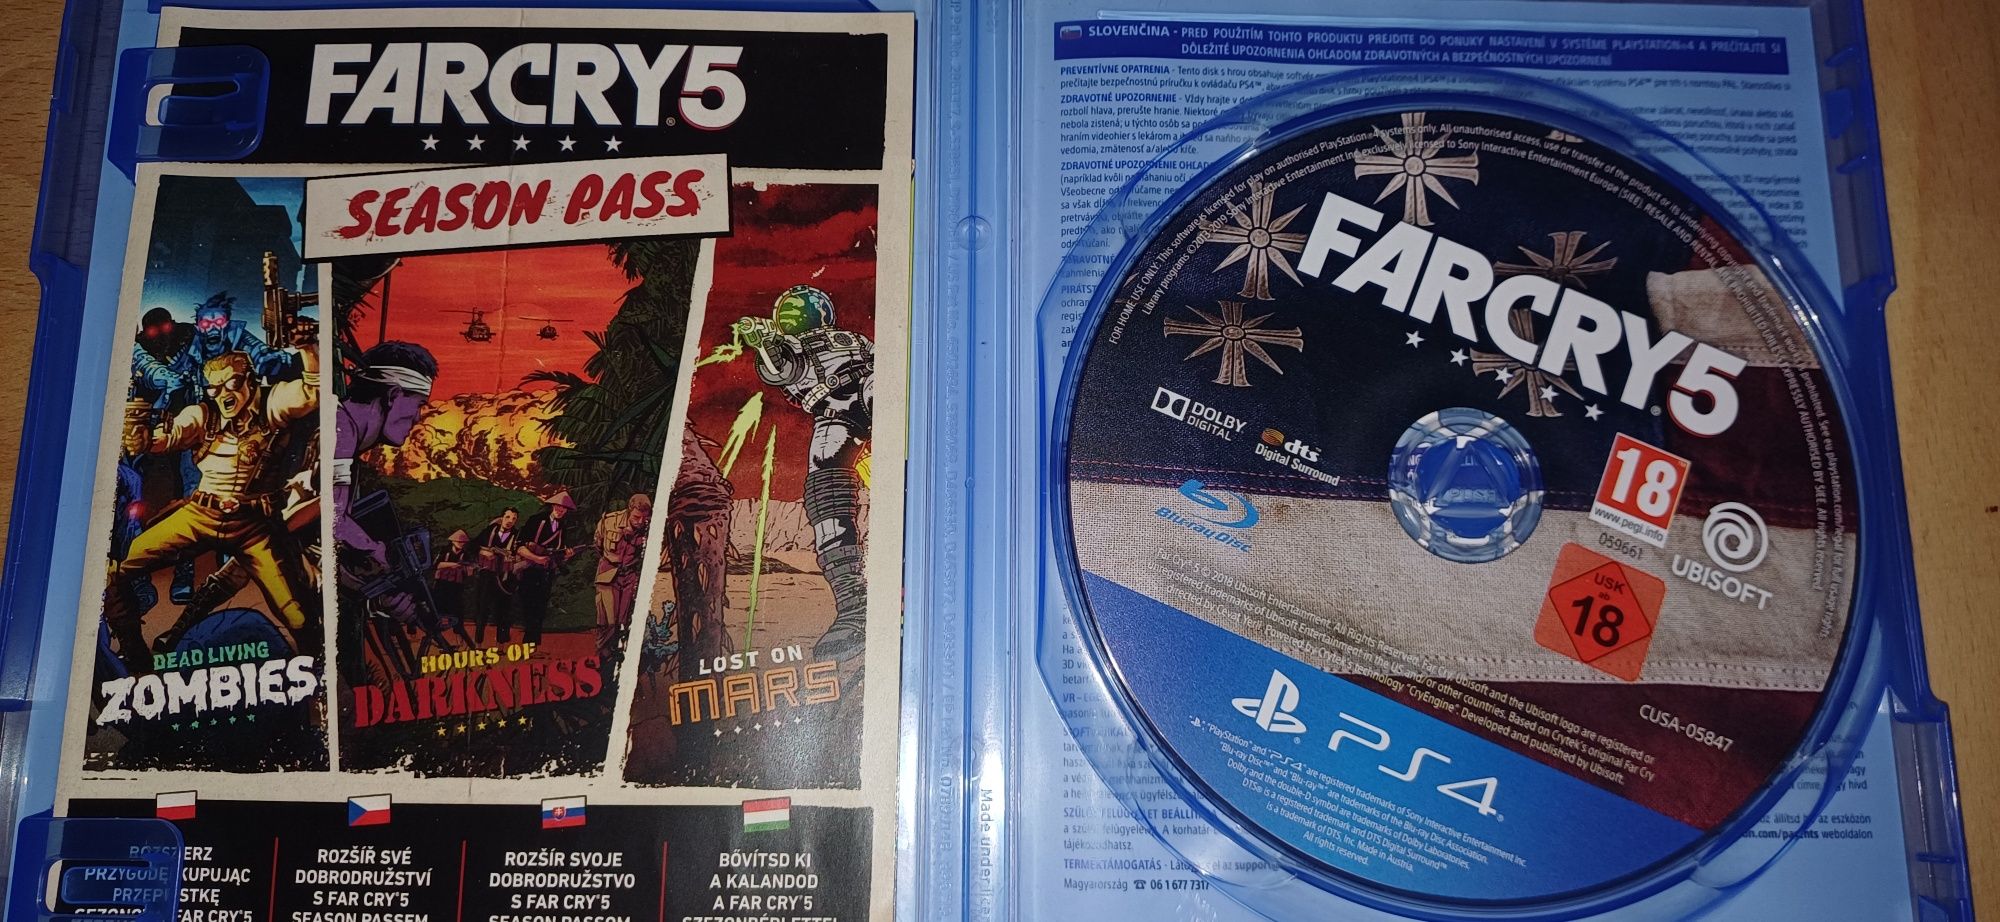 Farcry 5 pl na ps4